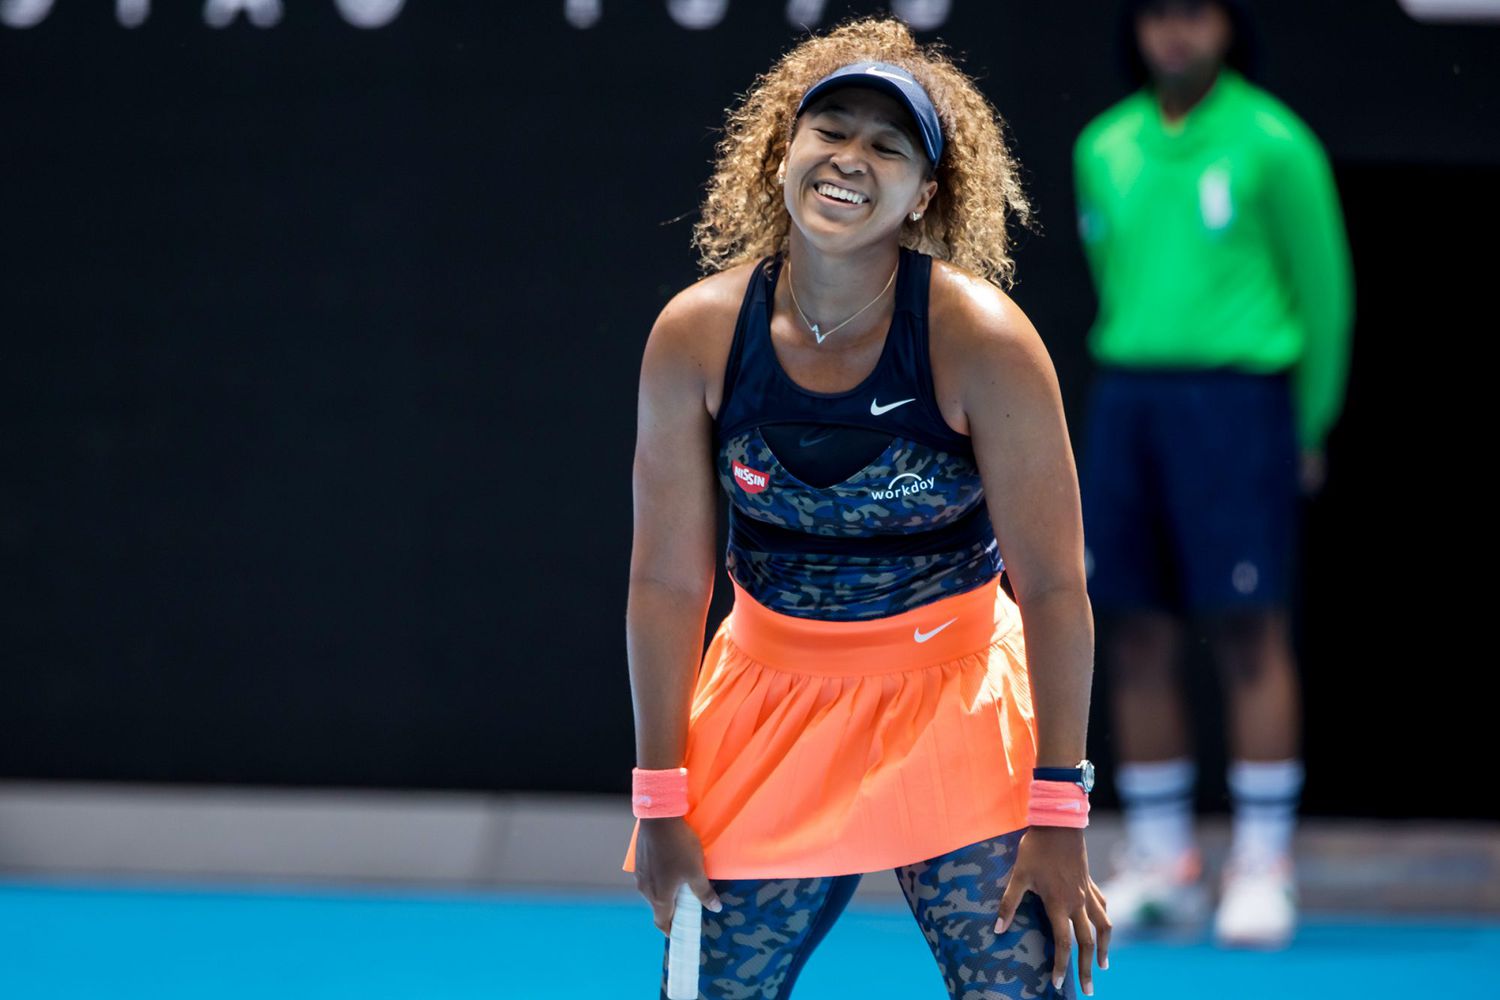 Naomi Osaka of Japan in action during the quarterfinals of the 2021 Australian Open on February 16 2021, at Melbourne Park